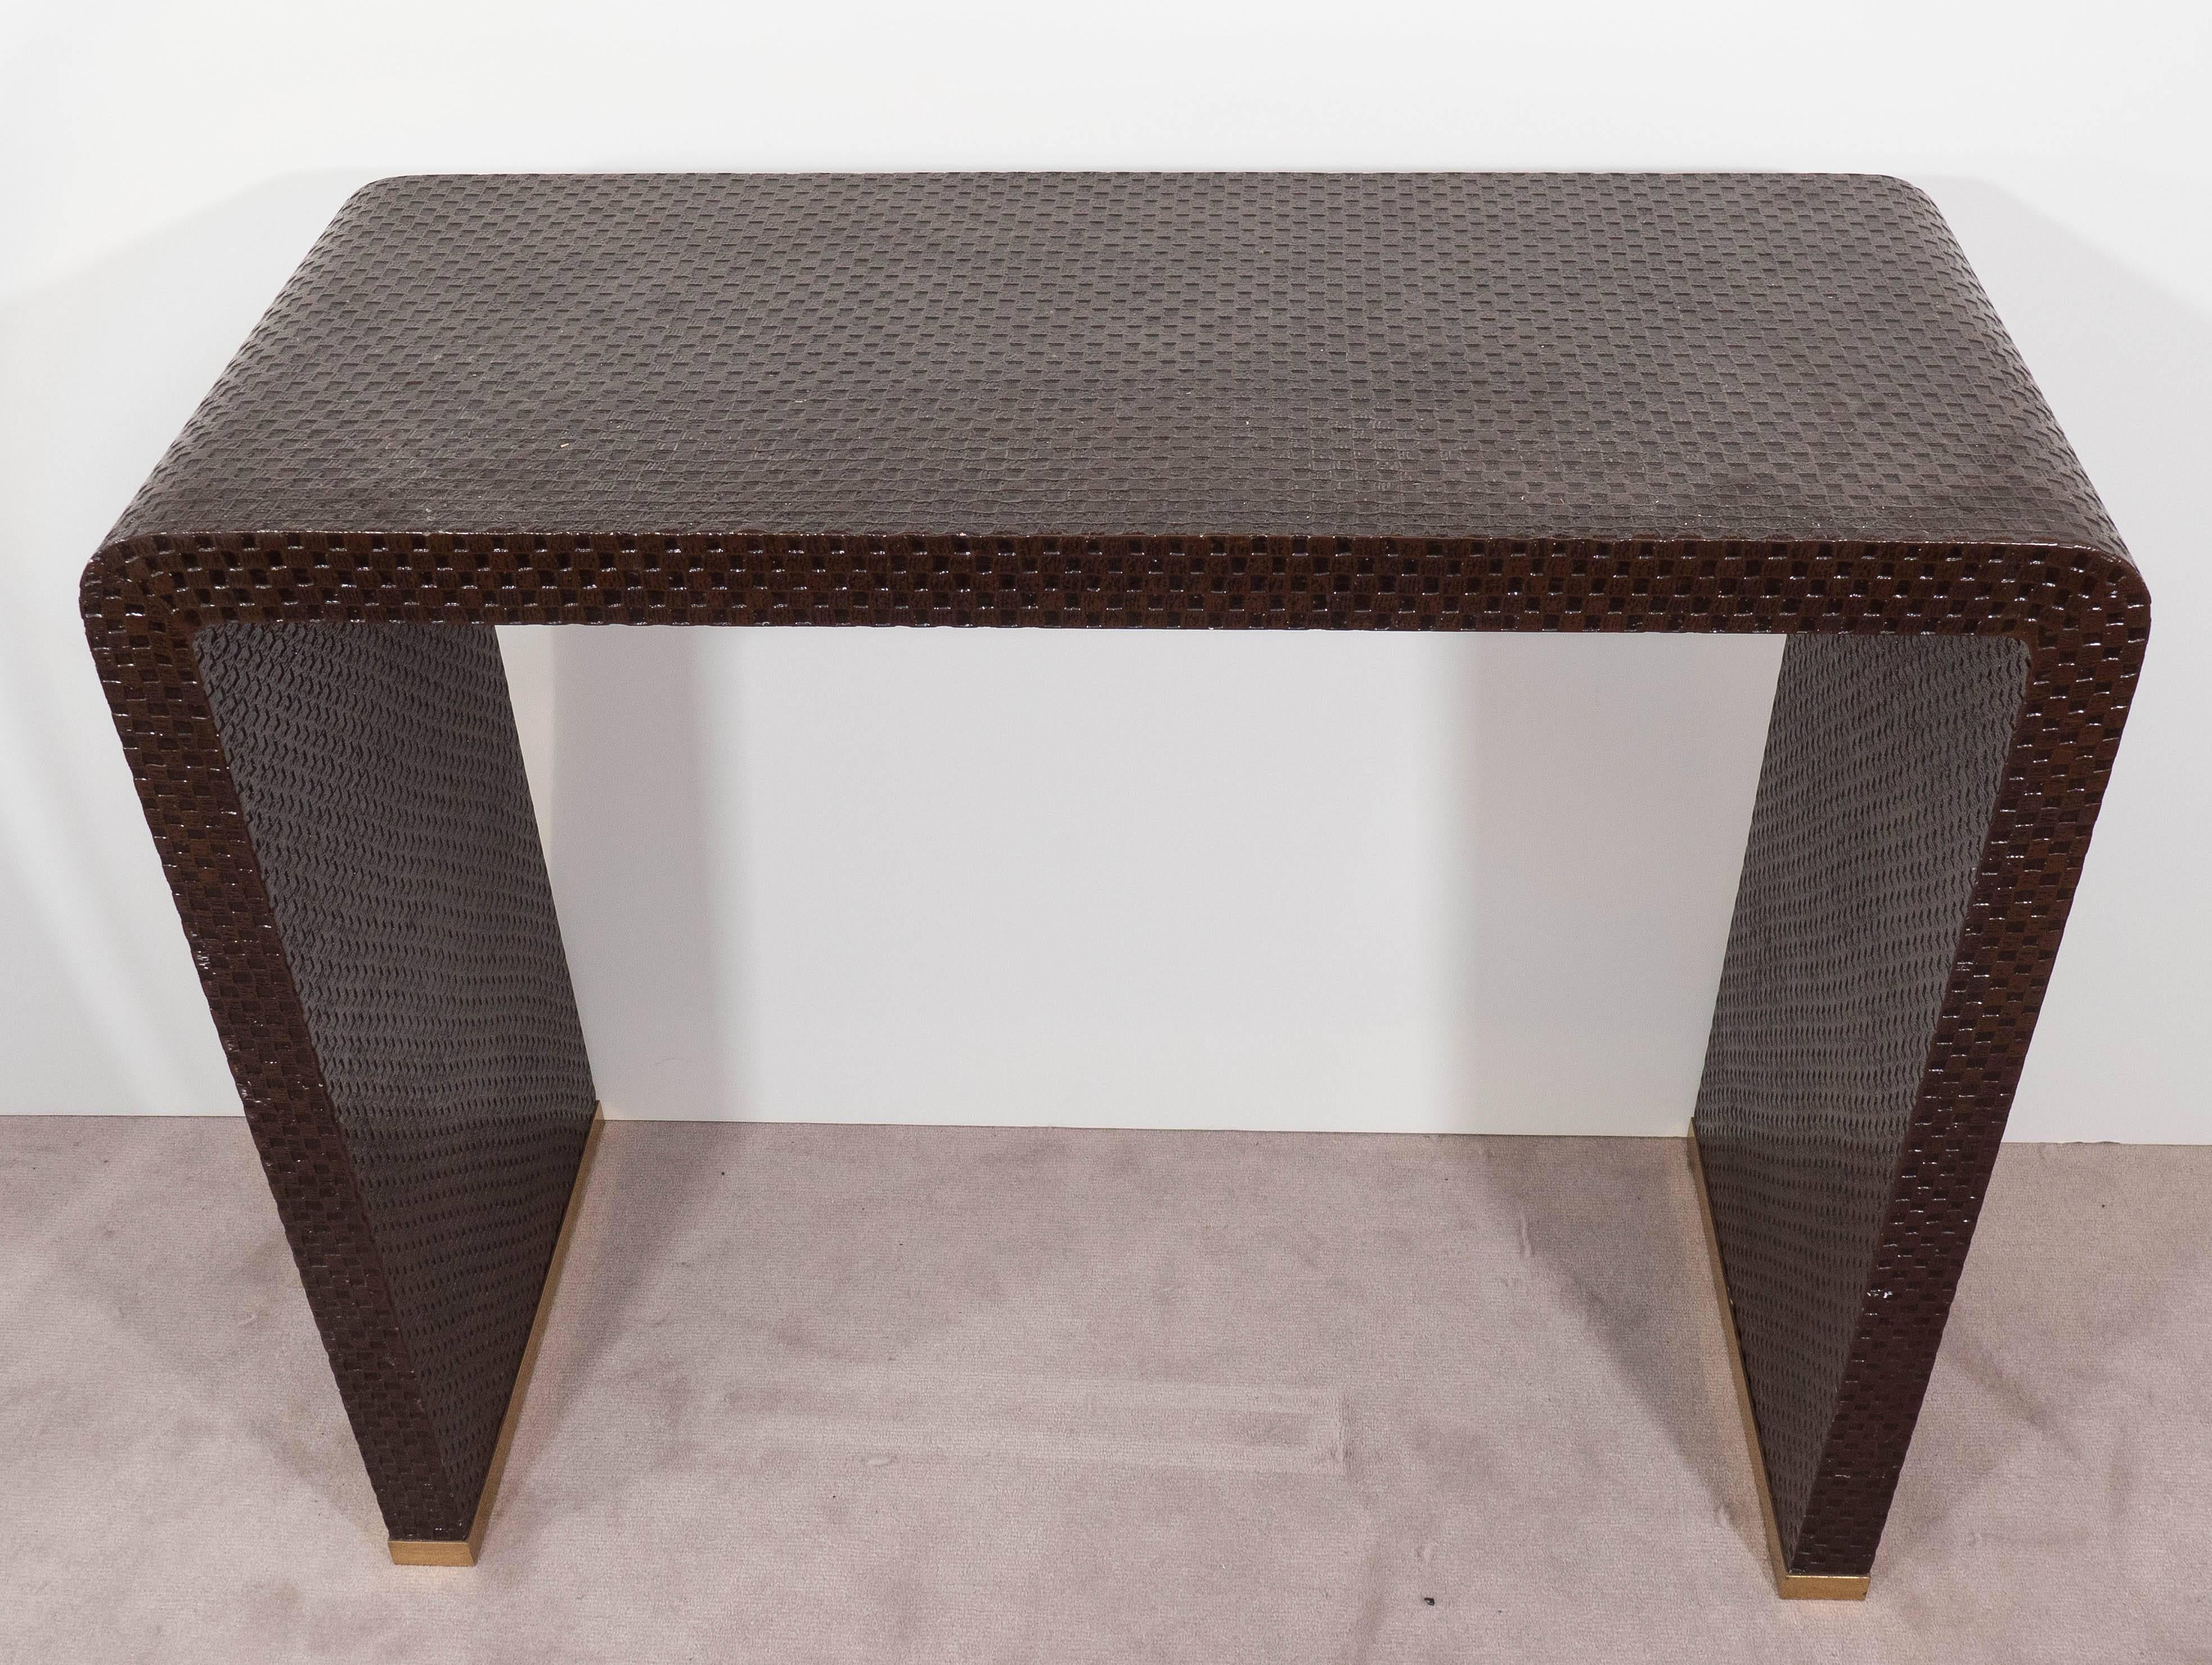 A waterfall console table, produced circa 1970s, with woven and lacquered grasscloth surface, against wood, with brass runners around the base. Good vintage condition, consistent with age and use.